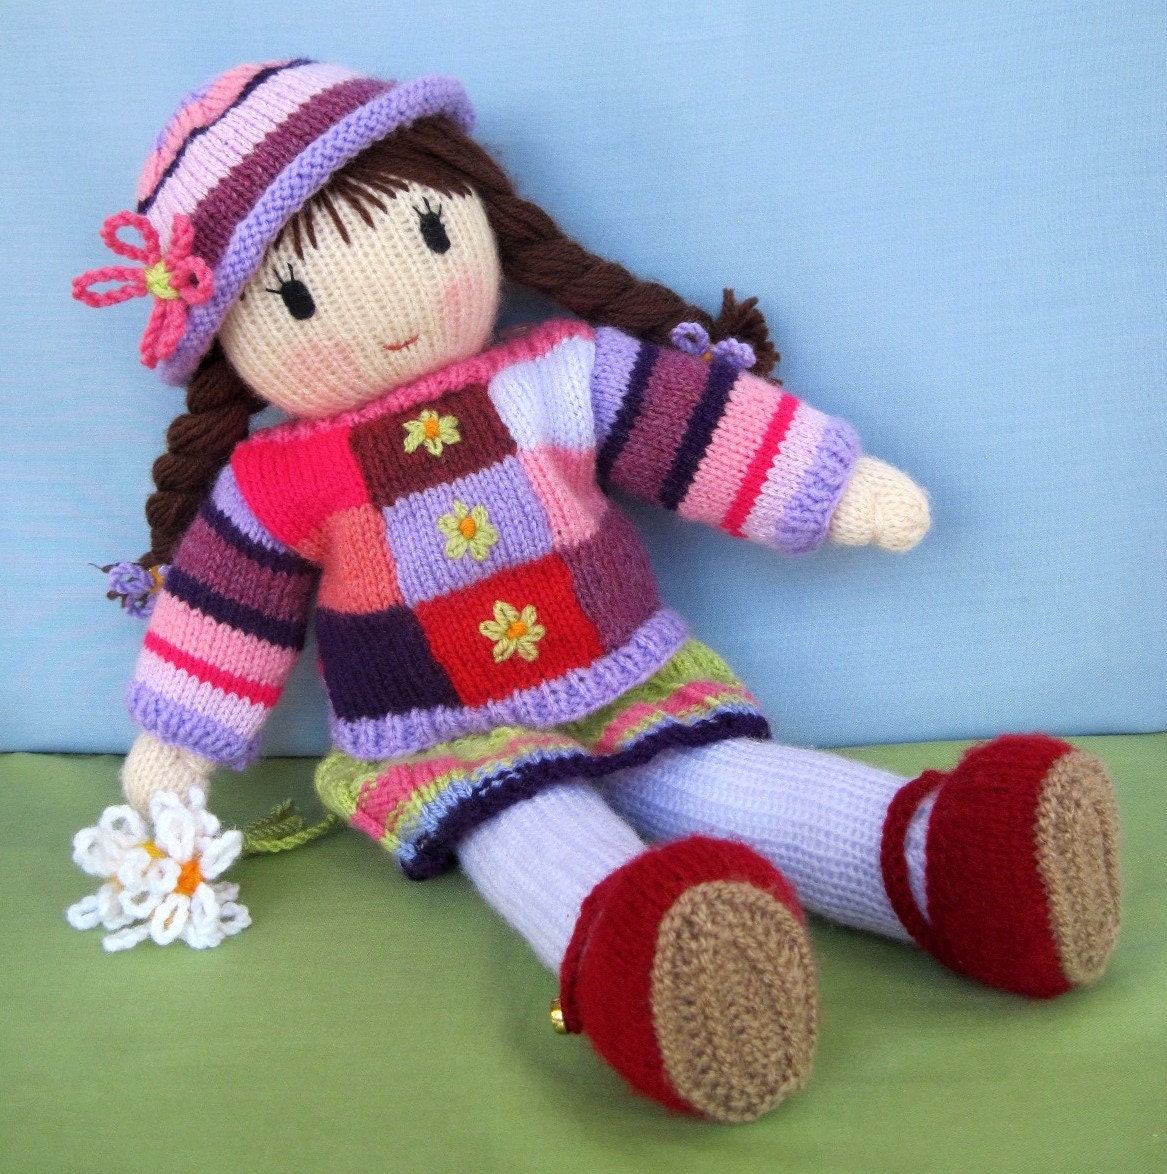 Posy Doll knitting pattern knitted doll Pdf INSTANT